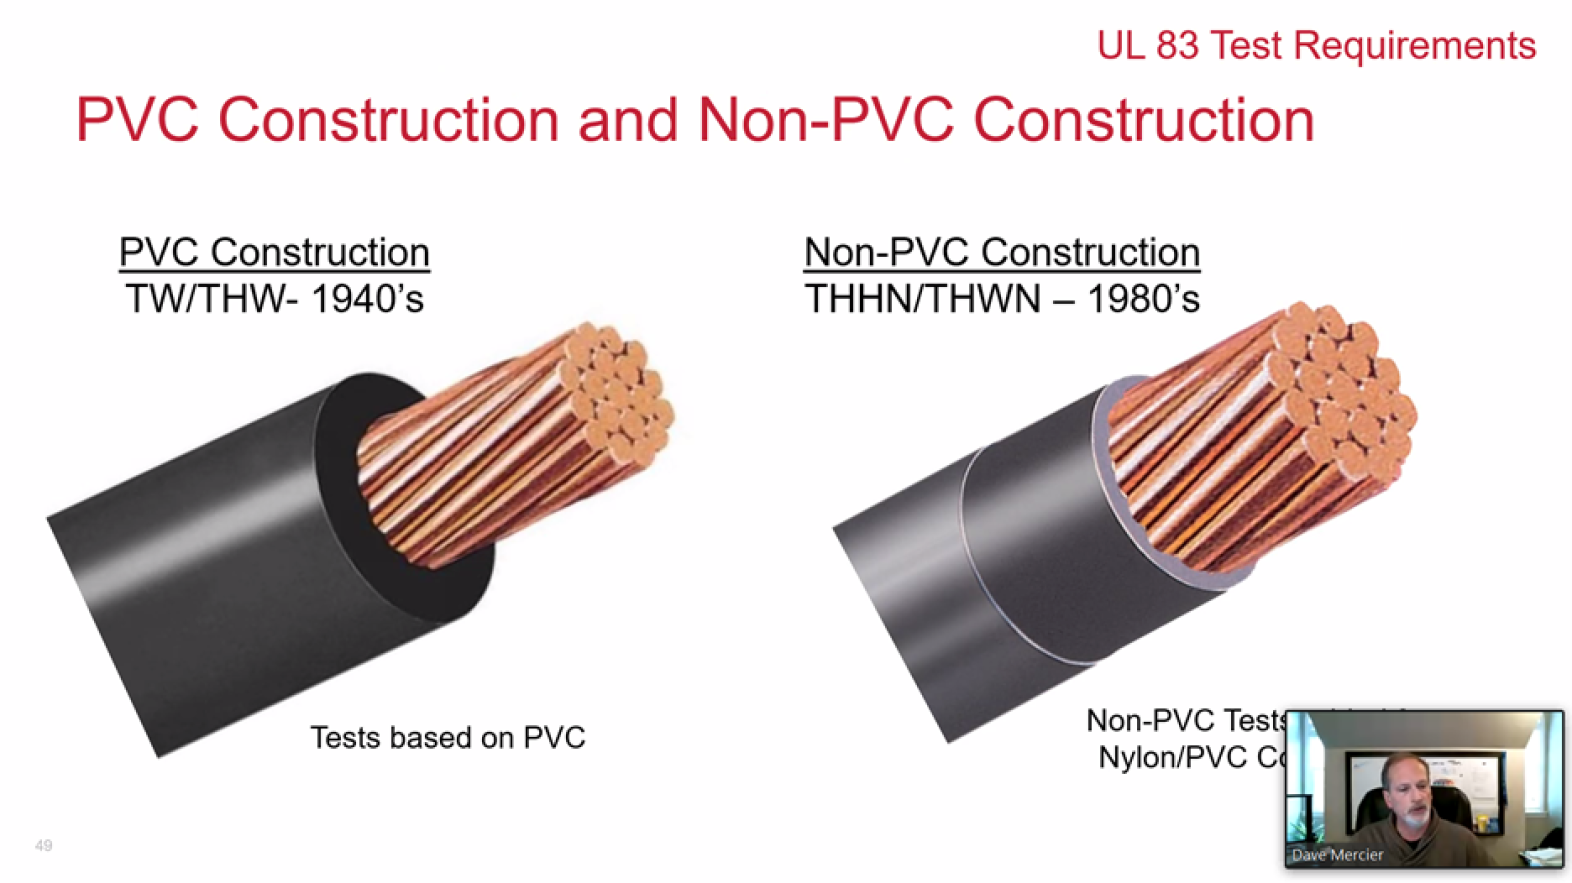 Dave Mercier, principal engineer at Underwriters Laboratories, presents on the test requirements in UL 83. On screen, two cross sections of electric wiring can be seen, demonstrating the difference between PVC and non-PVC wire insulation